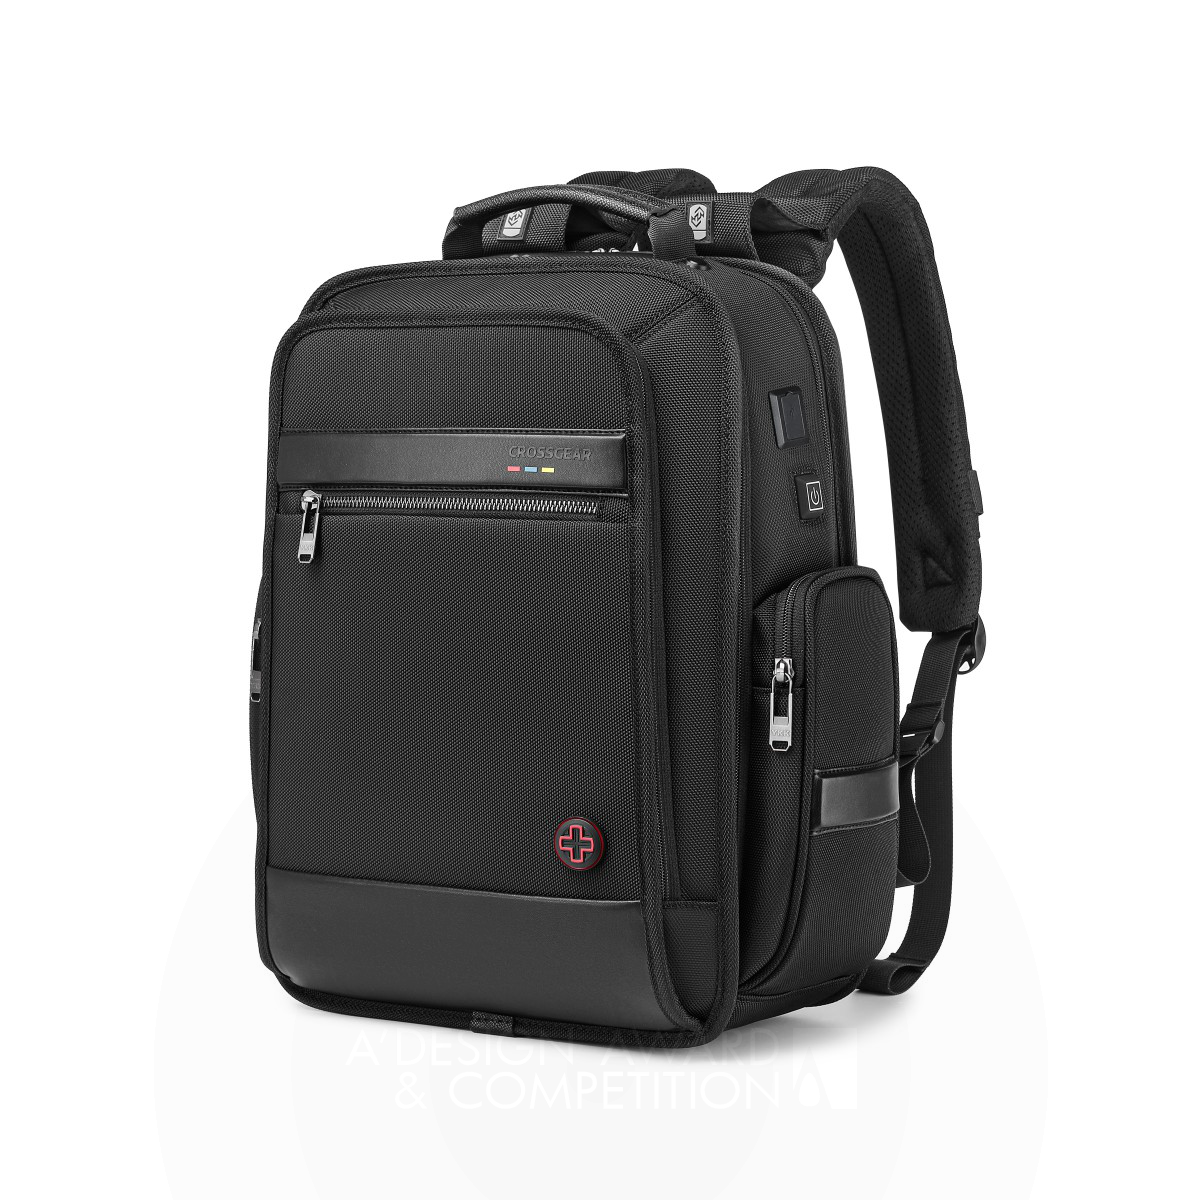 Crossgear Weight Loss Master Pro Backpack